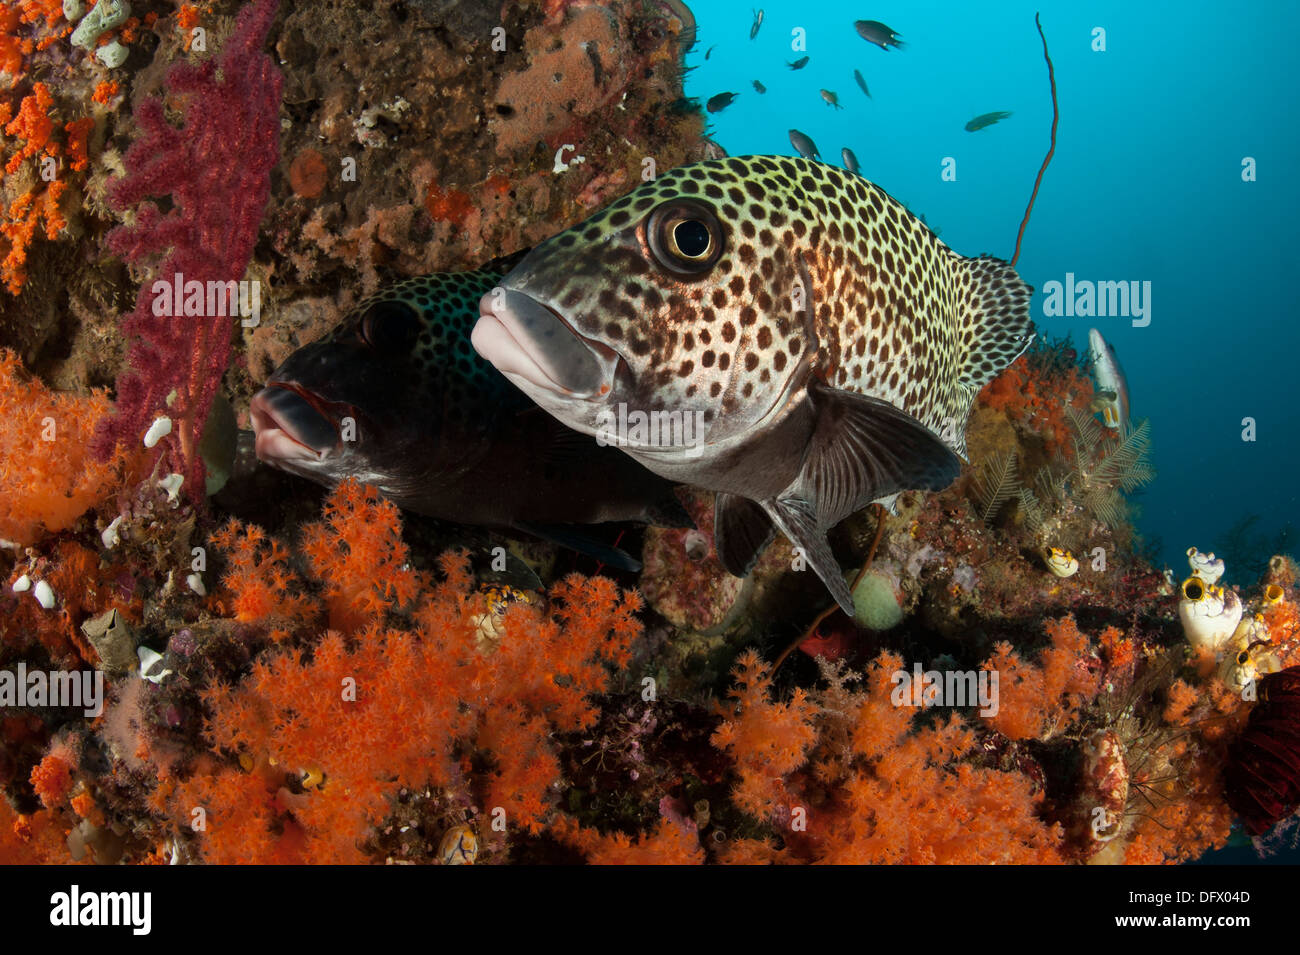 A pair of many-spotted sweetlips (Plectorhinchus chaetodonoides) on a soft coral covered reef, Raja Ampat, Indonesia. Stock Photo